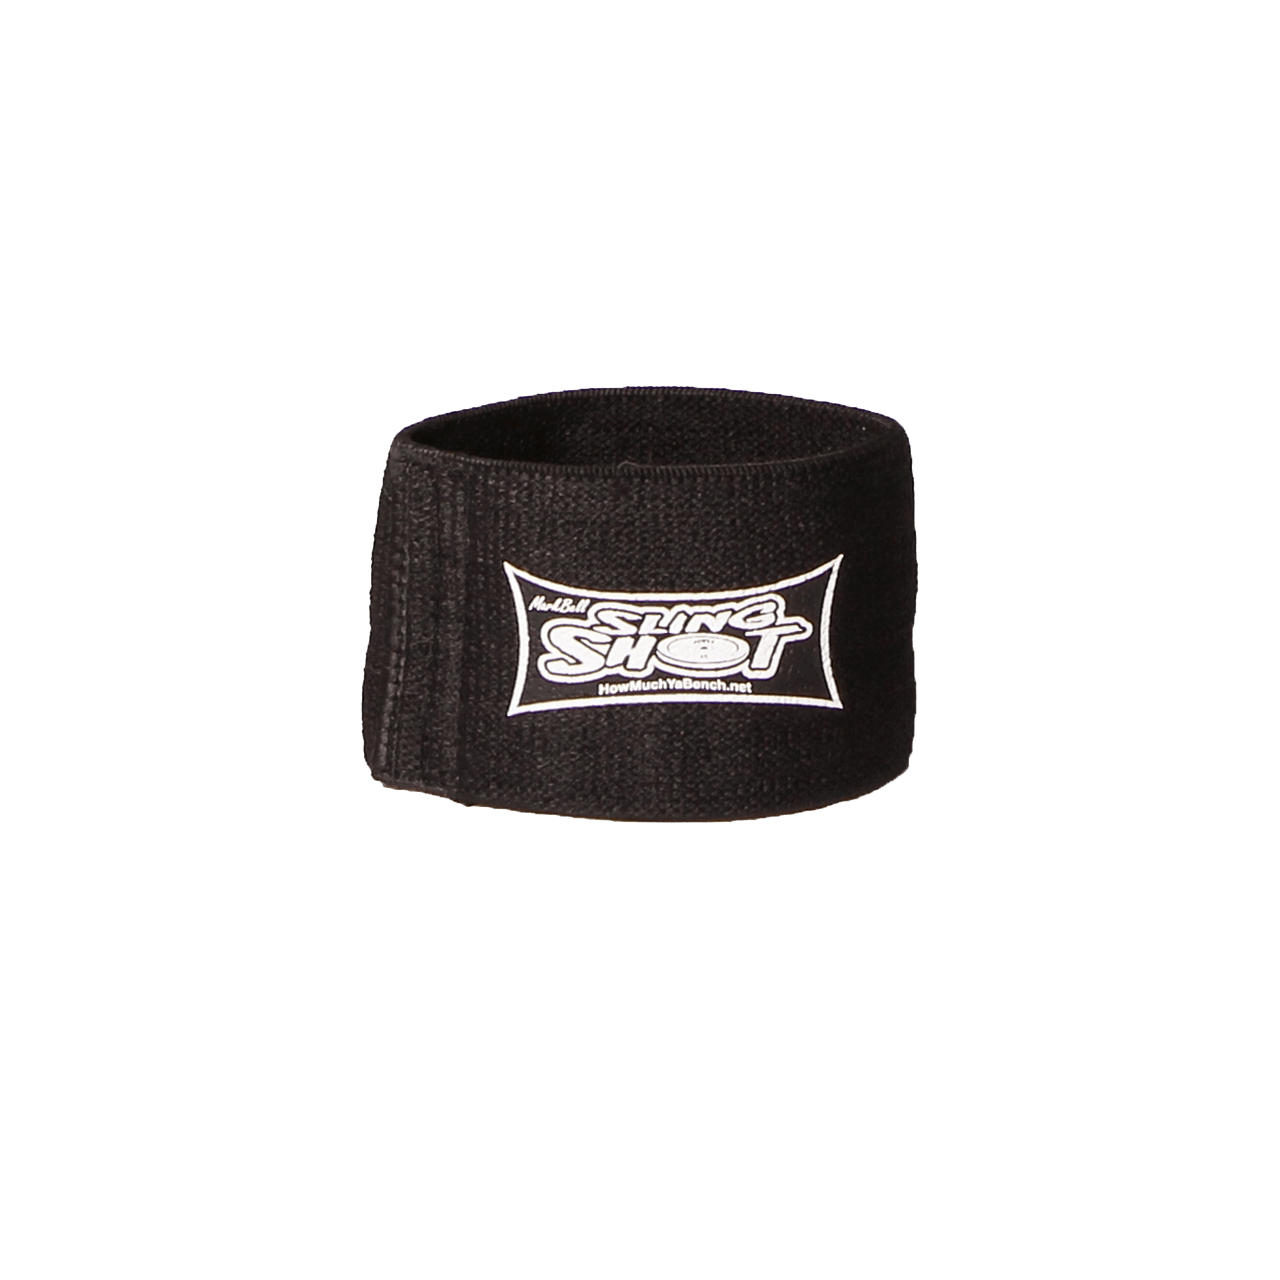 Sling Shot | Compression Cuff | Upper Body - XTC Fitness - Exercise Equipment Superstore - Canada - Compression Cuffs